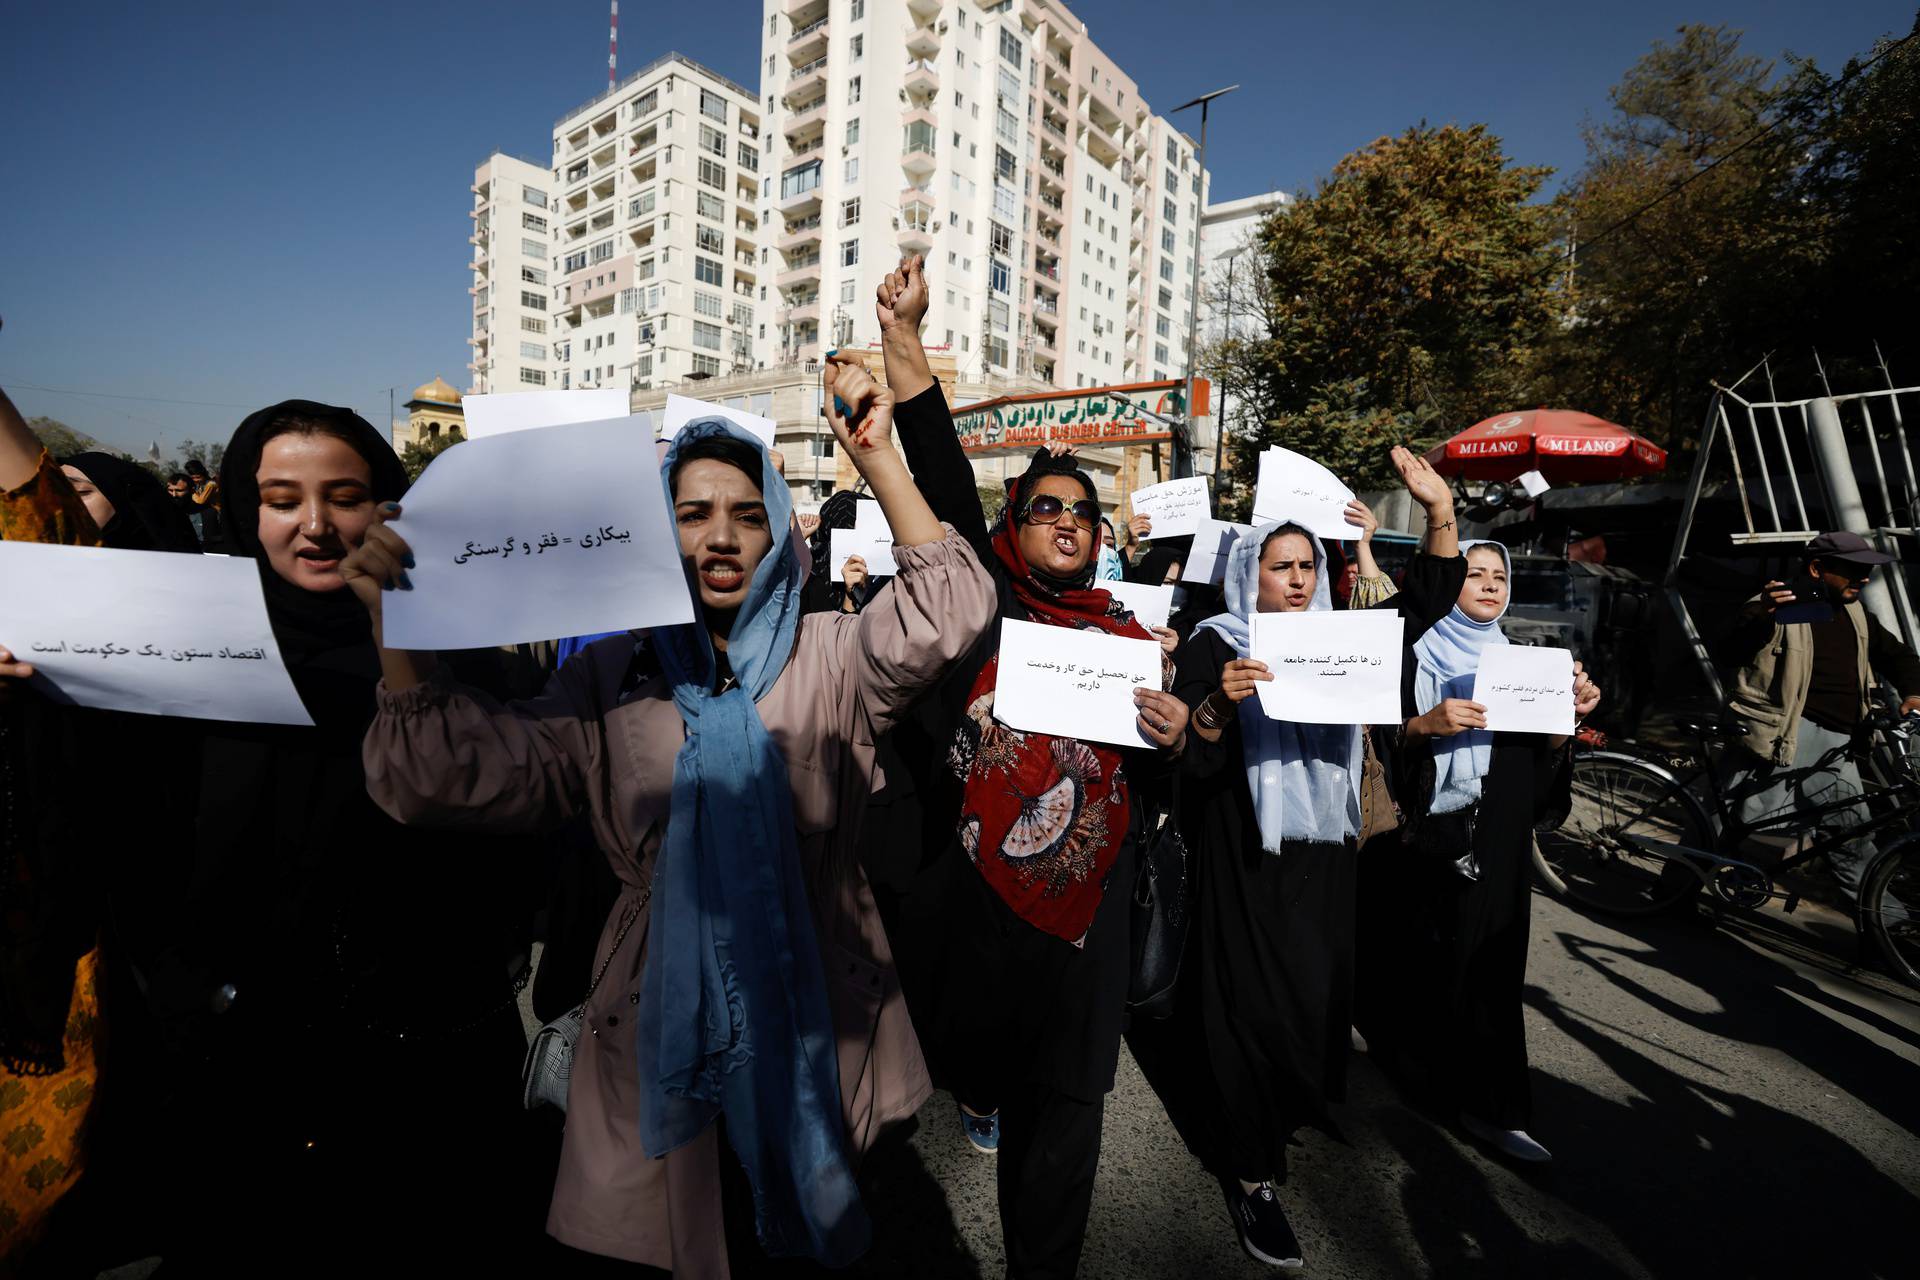 Afghan women gather for a women's rights protest march in central Kabul